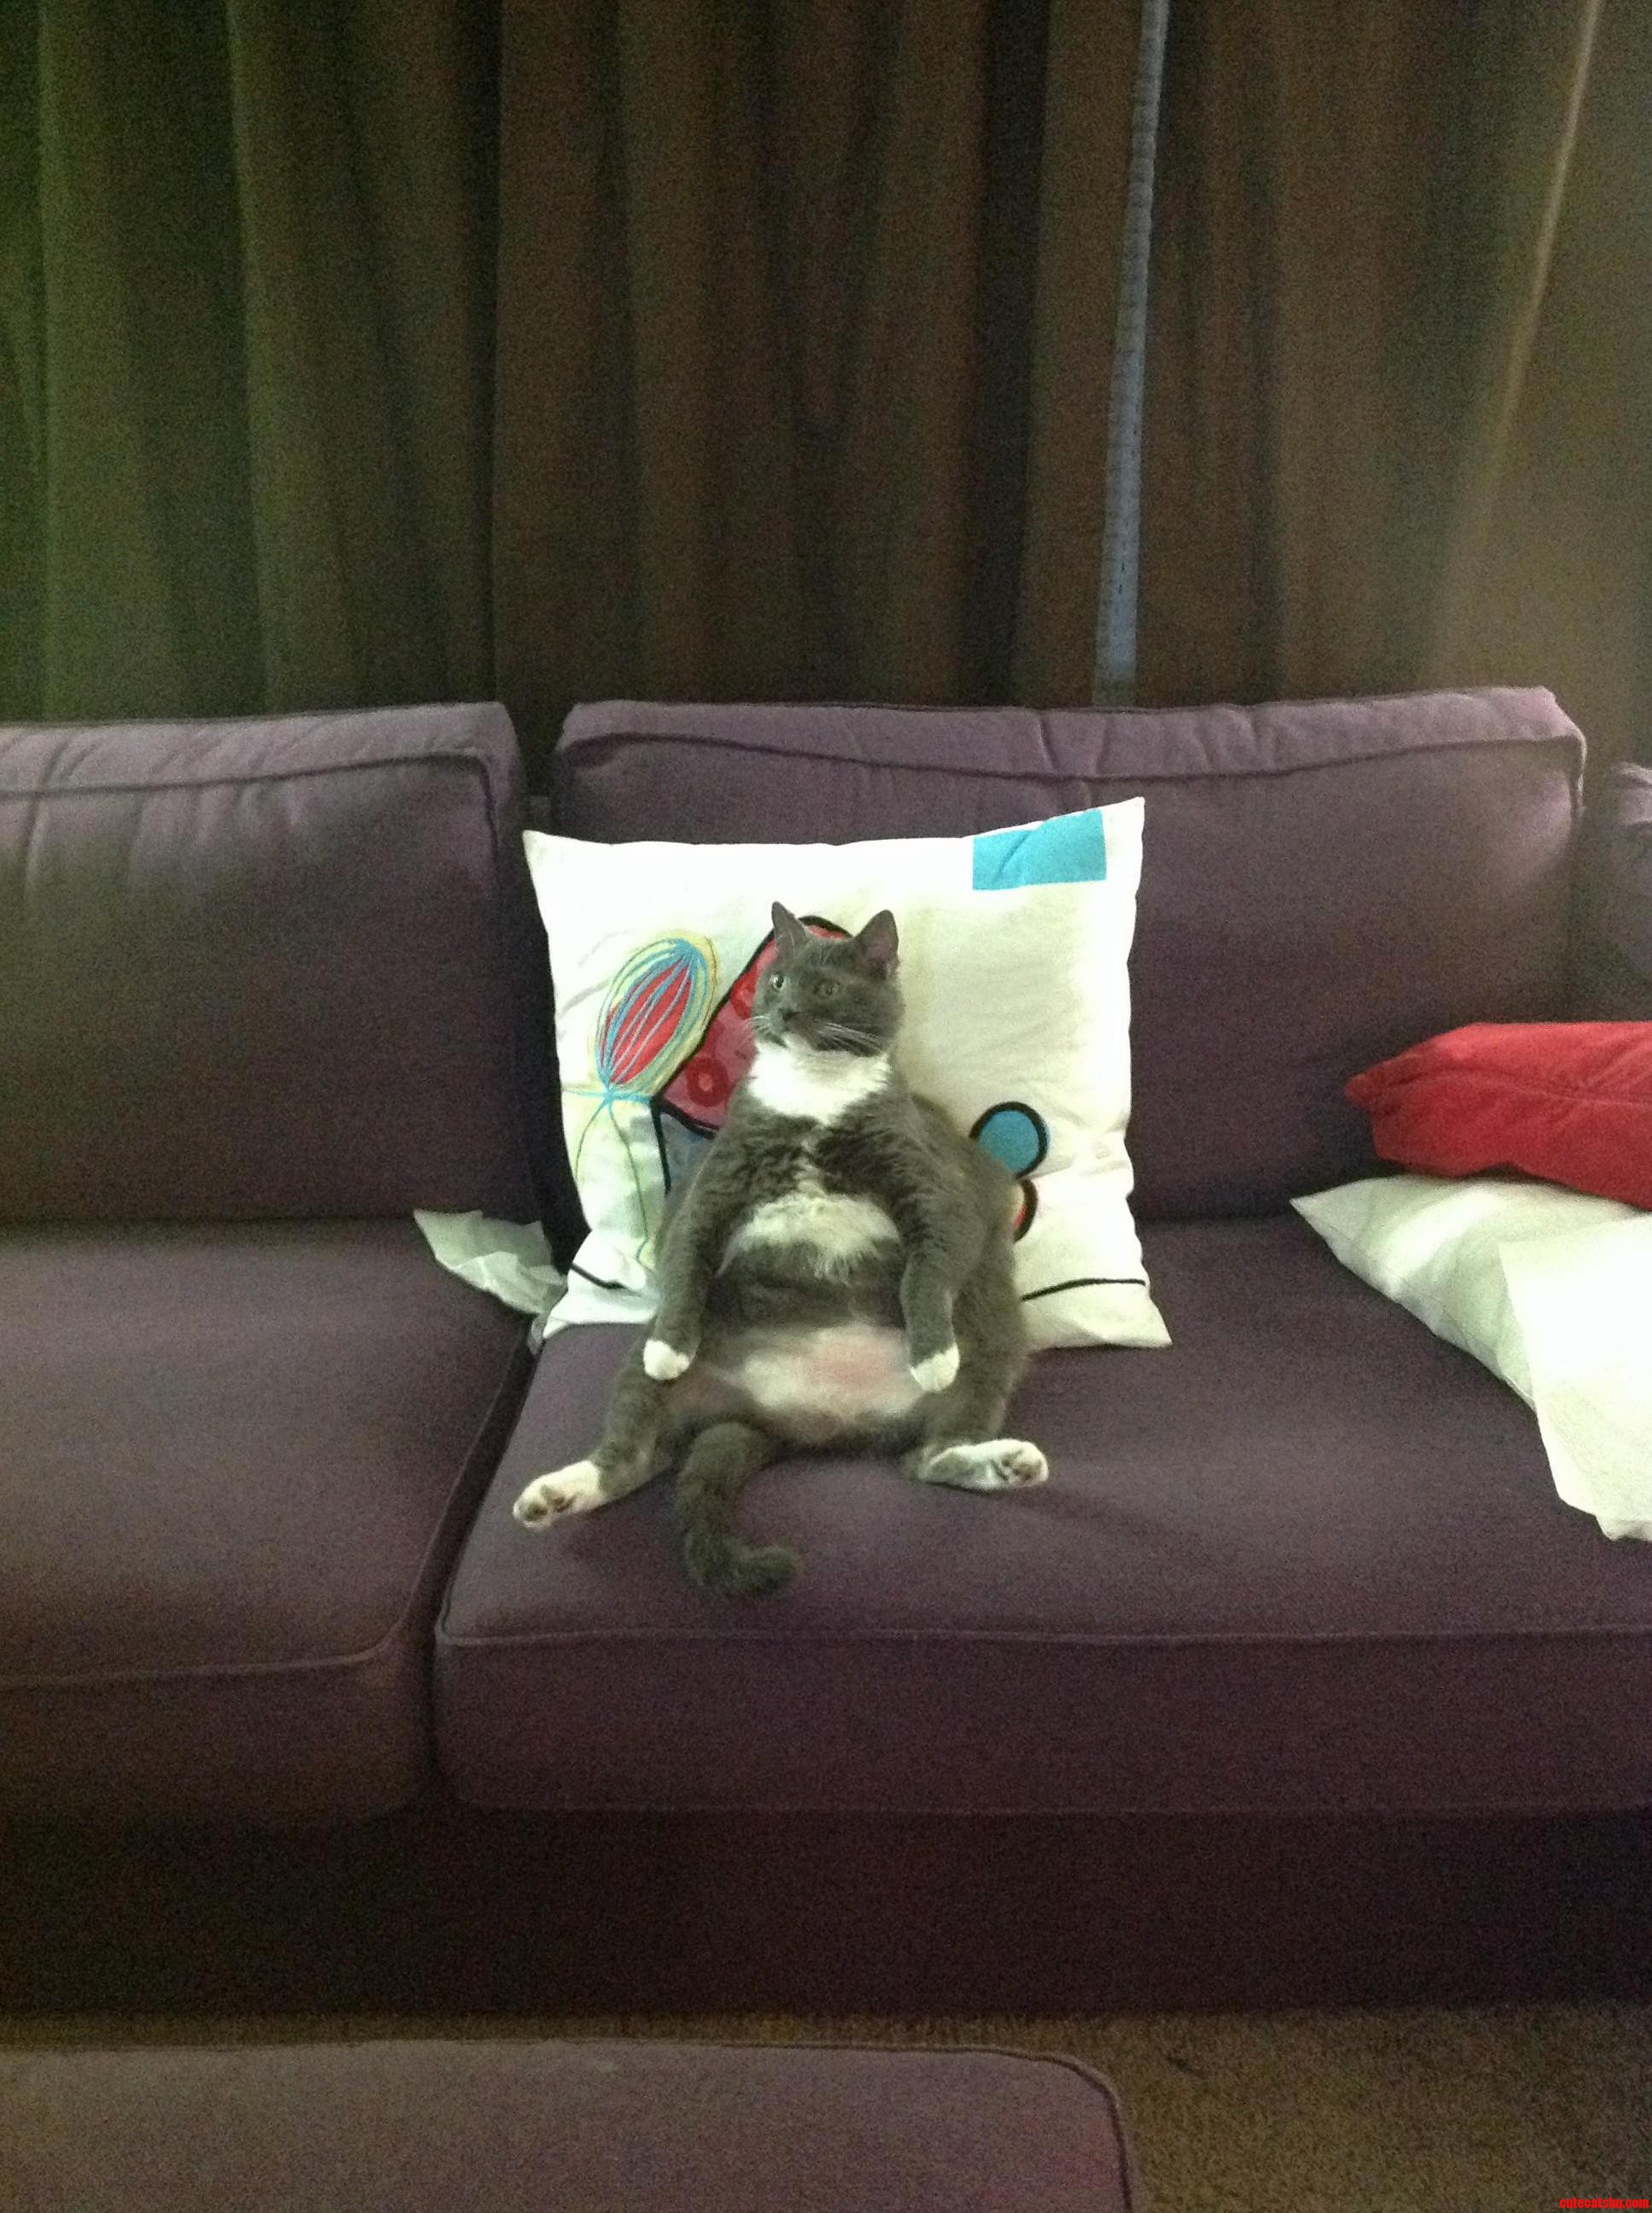 Our cat gets high on catnip then watches family guy for hours. i walked in on her like this